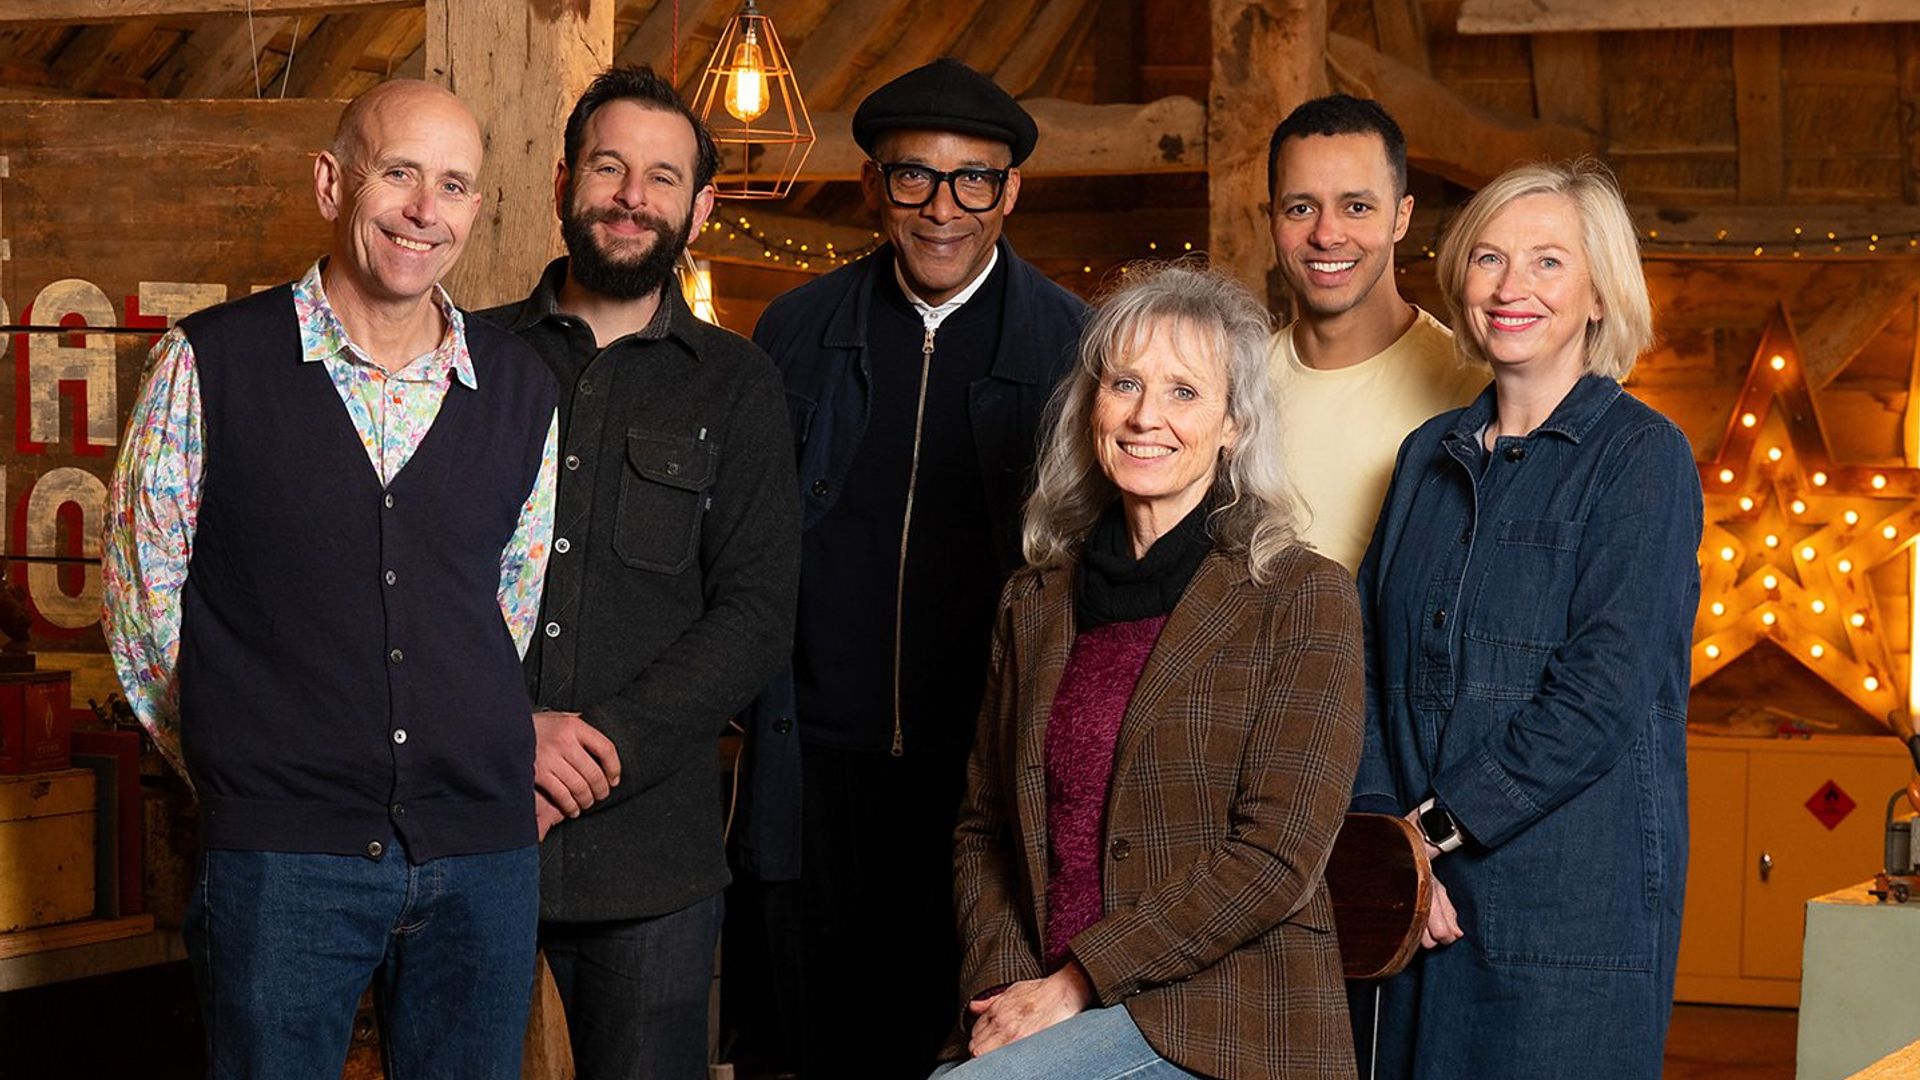 Meet the cast of BBC’s The Repair Shop - all about the experts